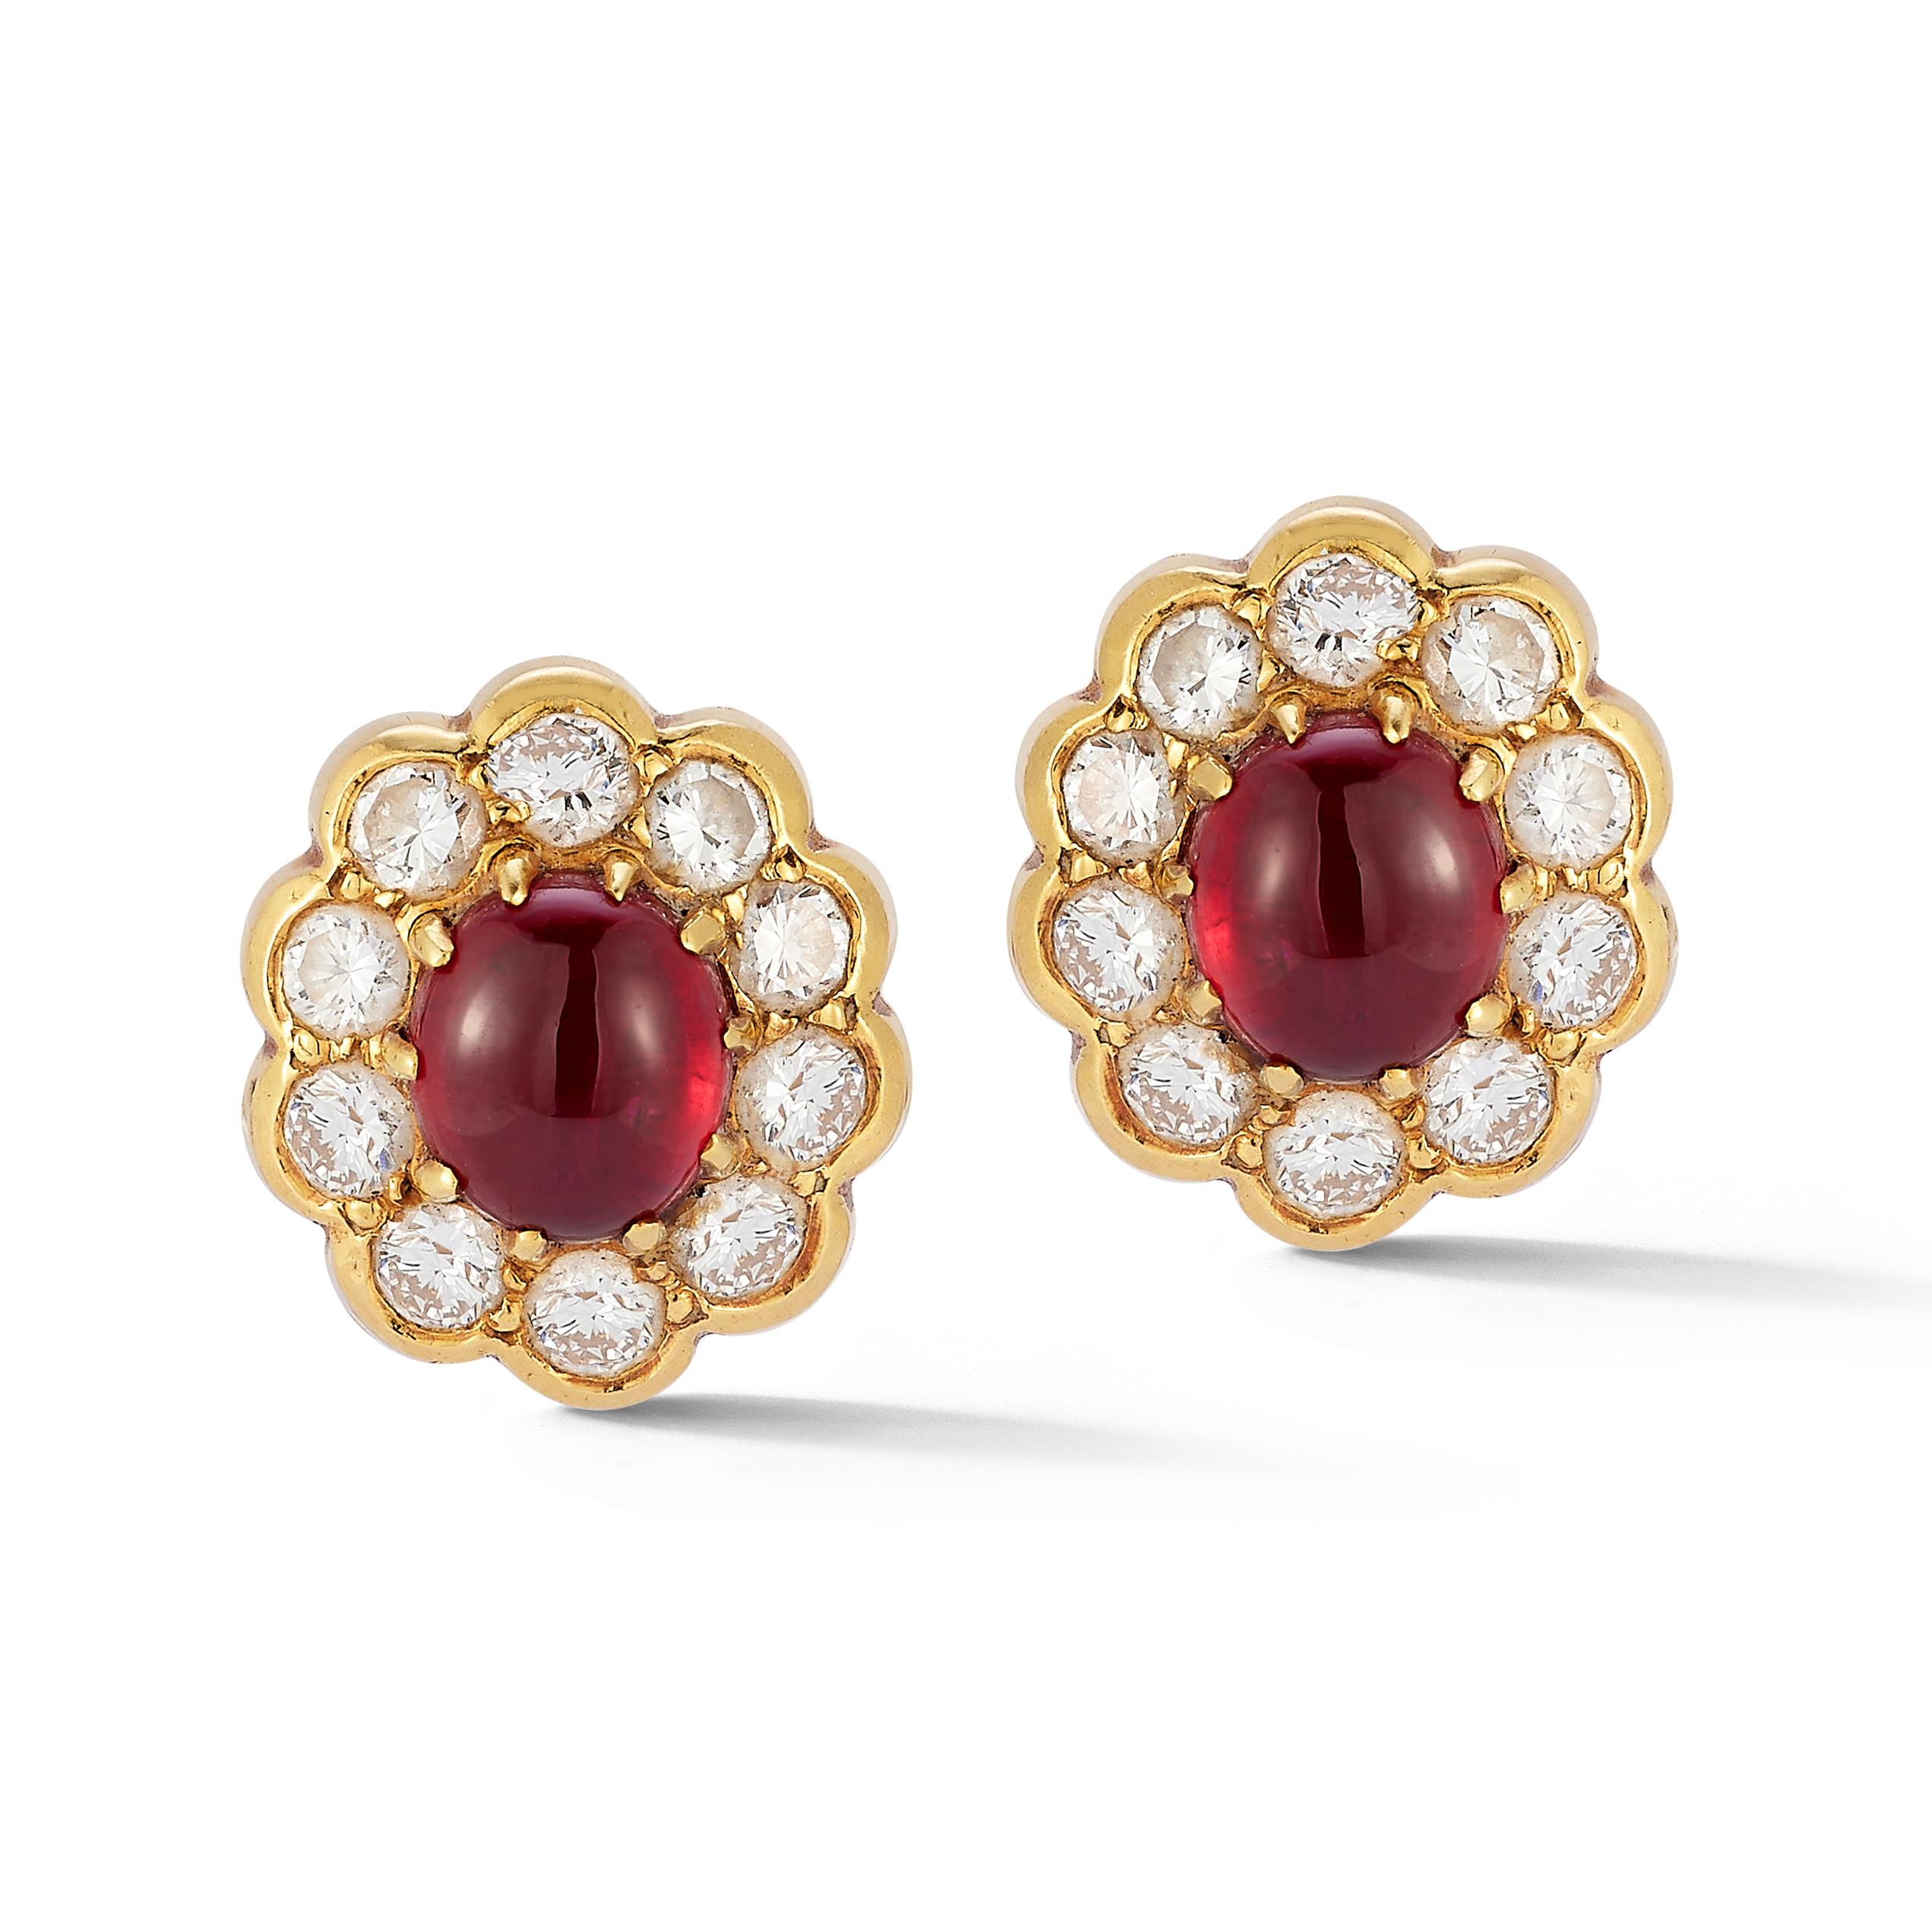 Van Cleef & Arpels Cabochon Ruby & Diamond Earrings

 A pair of earrings consisting of 1 center cabochon ruby surrounded by round cut diamonds forming a flower motif.

Measurements: .44